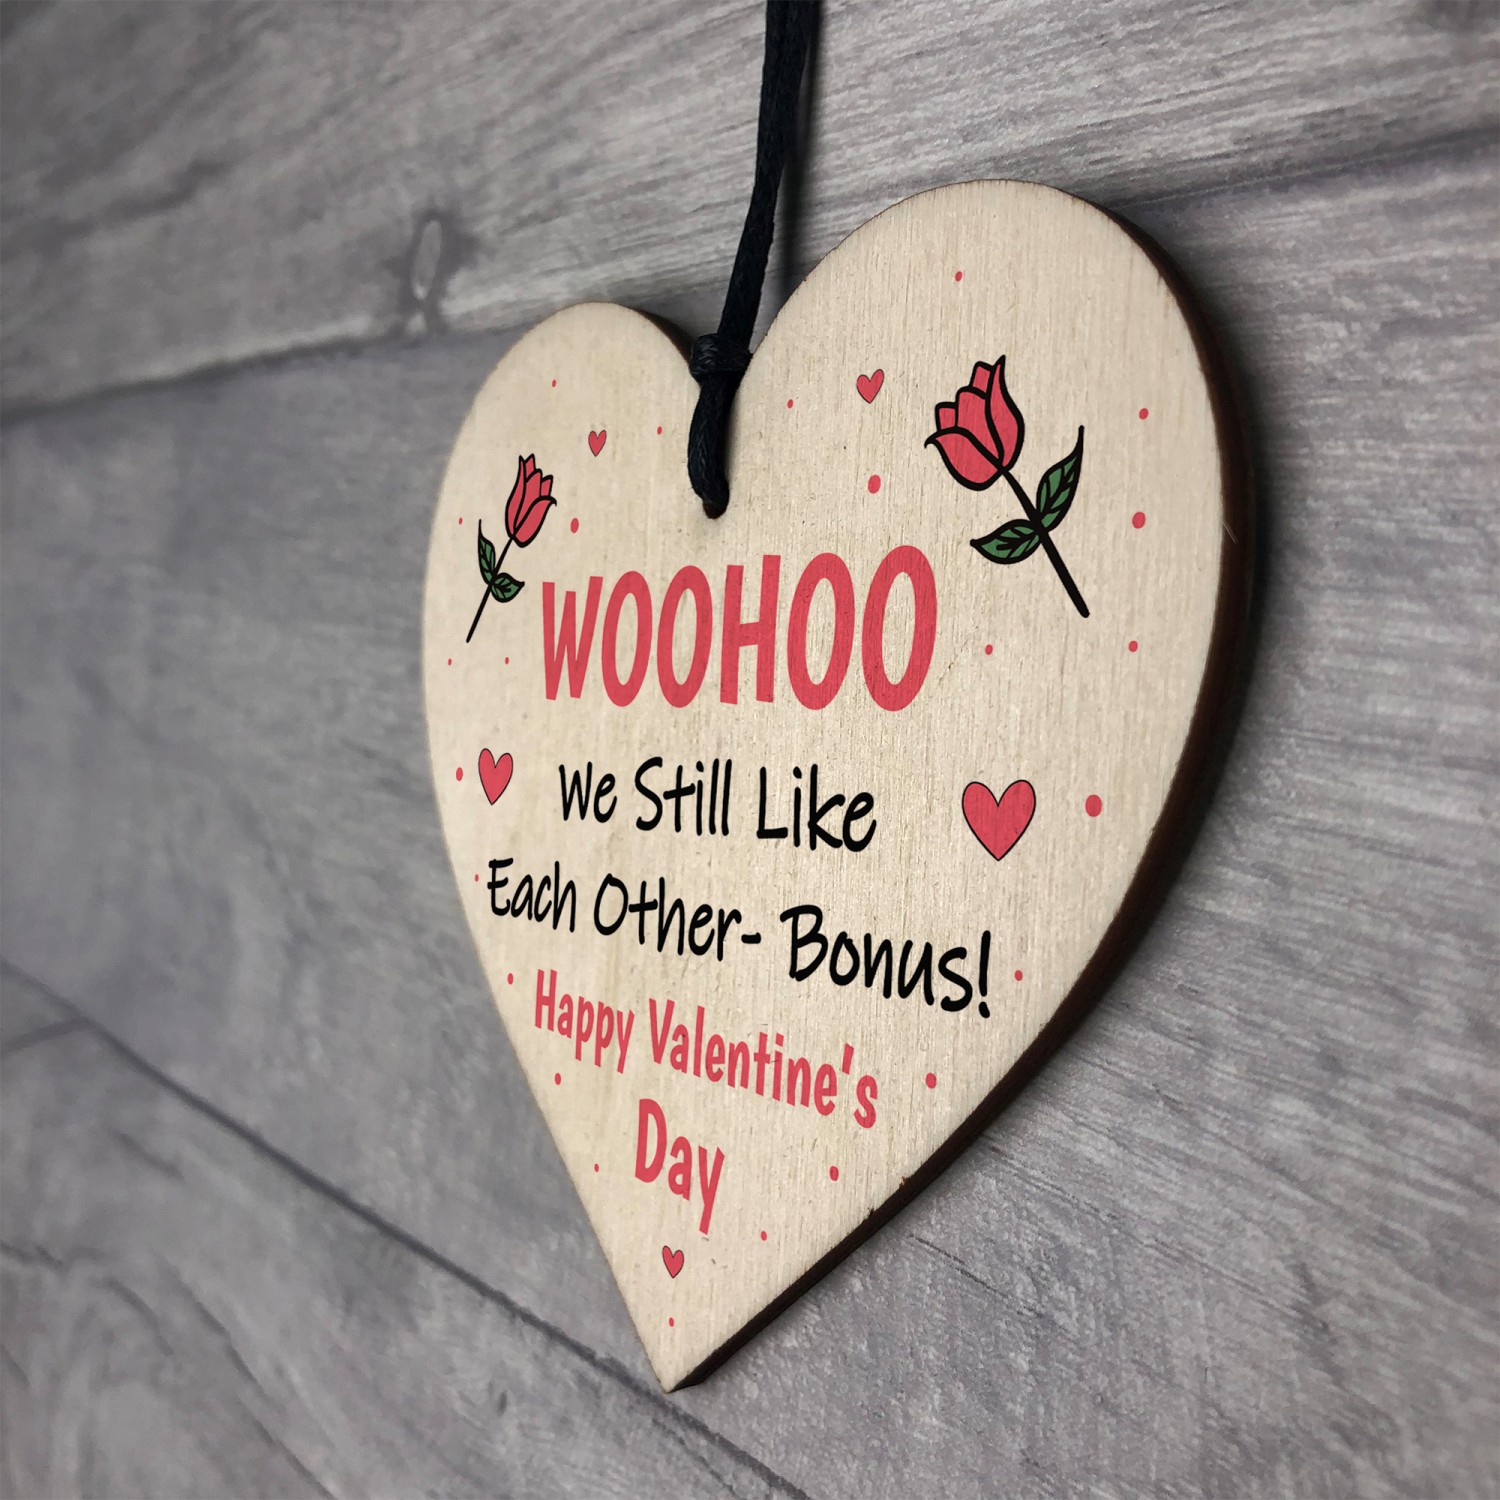 Valentine's Day Gift |Romantic Gifts|Gift for Valentine|Love Gifts Tagged  